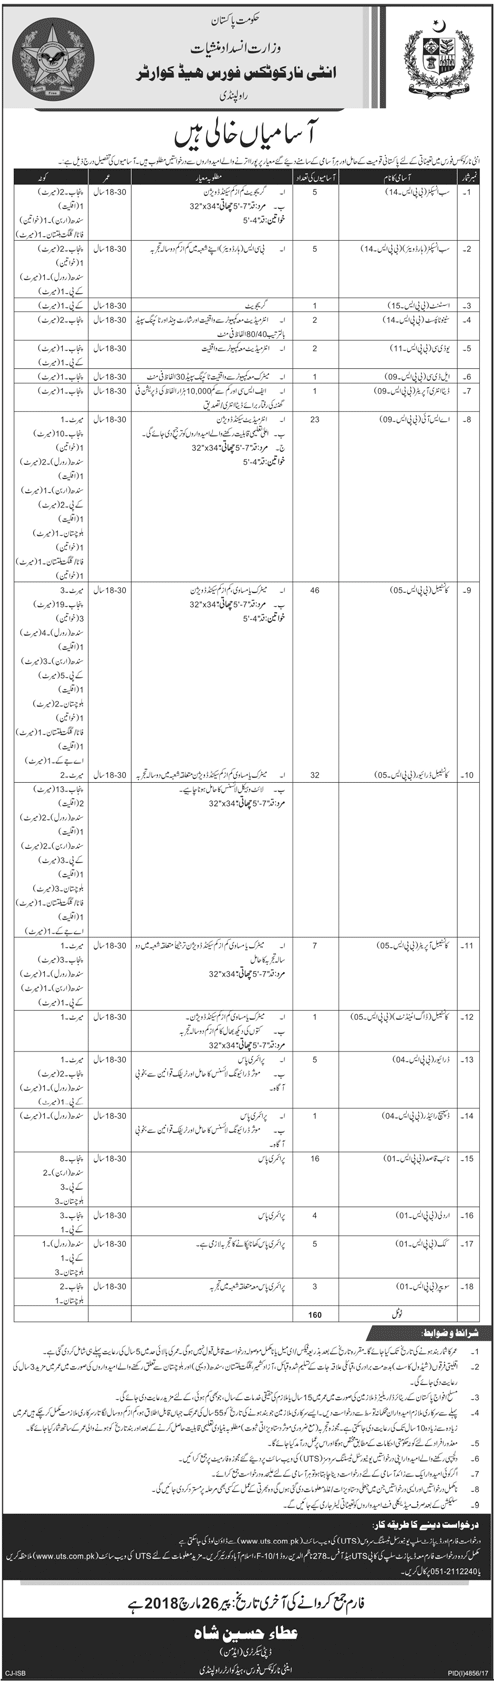 Anti Narcotics Force Jobs 2018 Application Form Download, Last Date